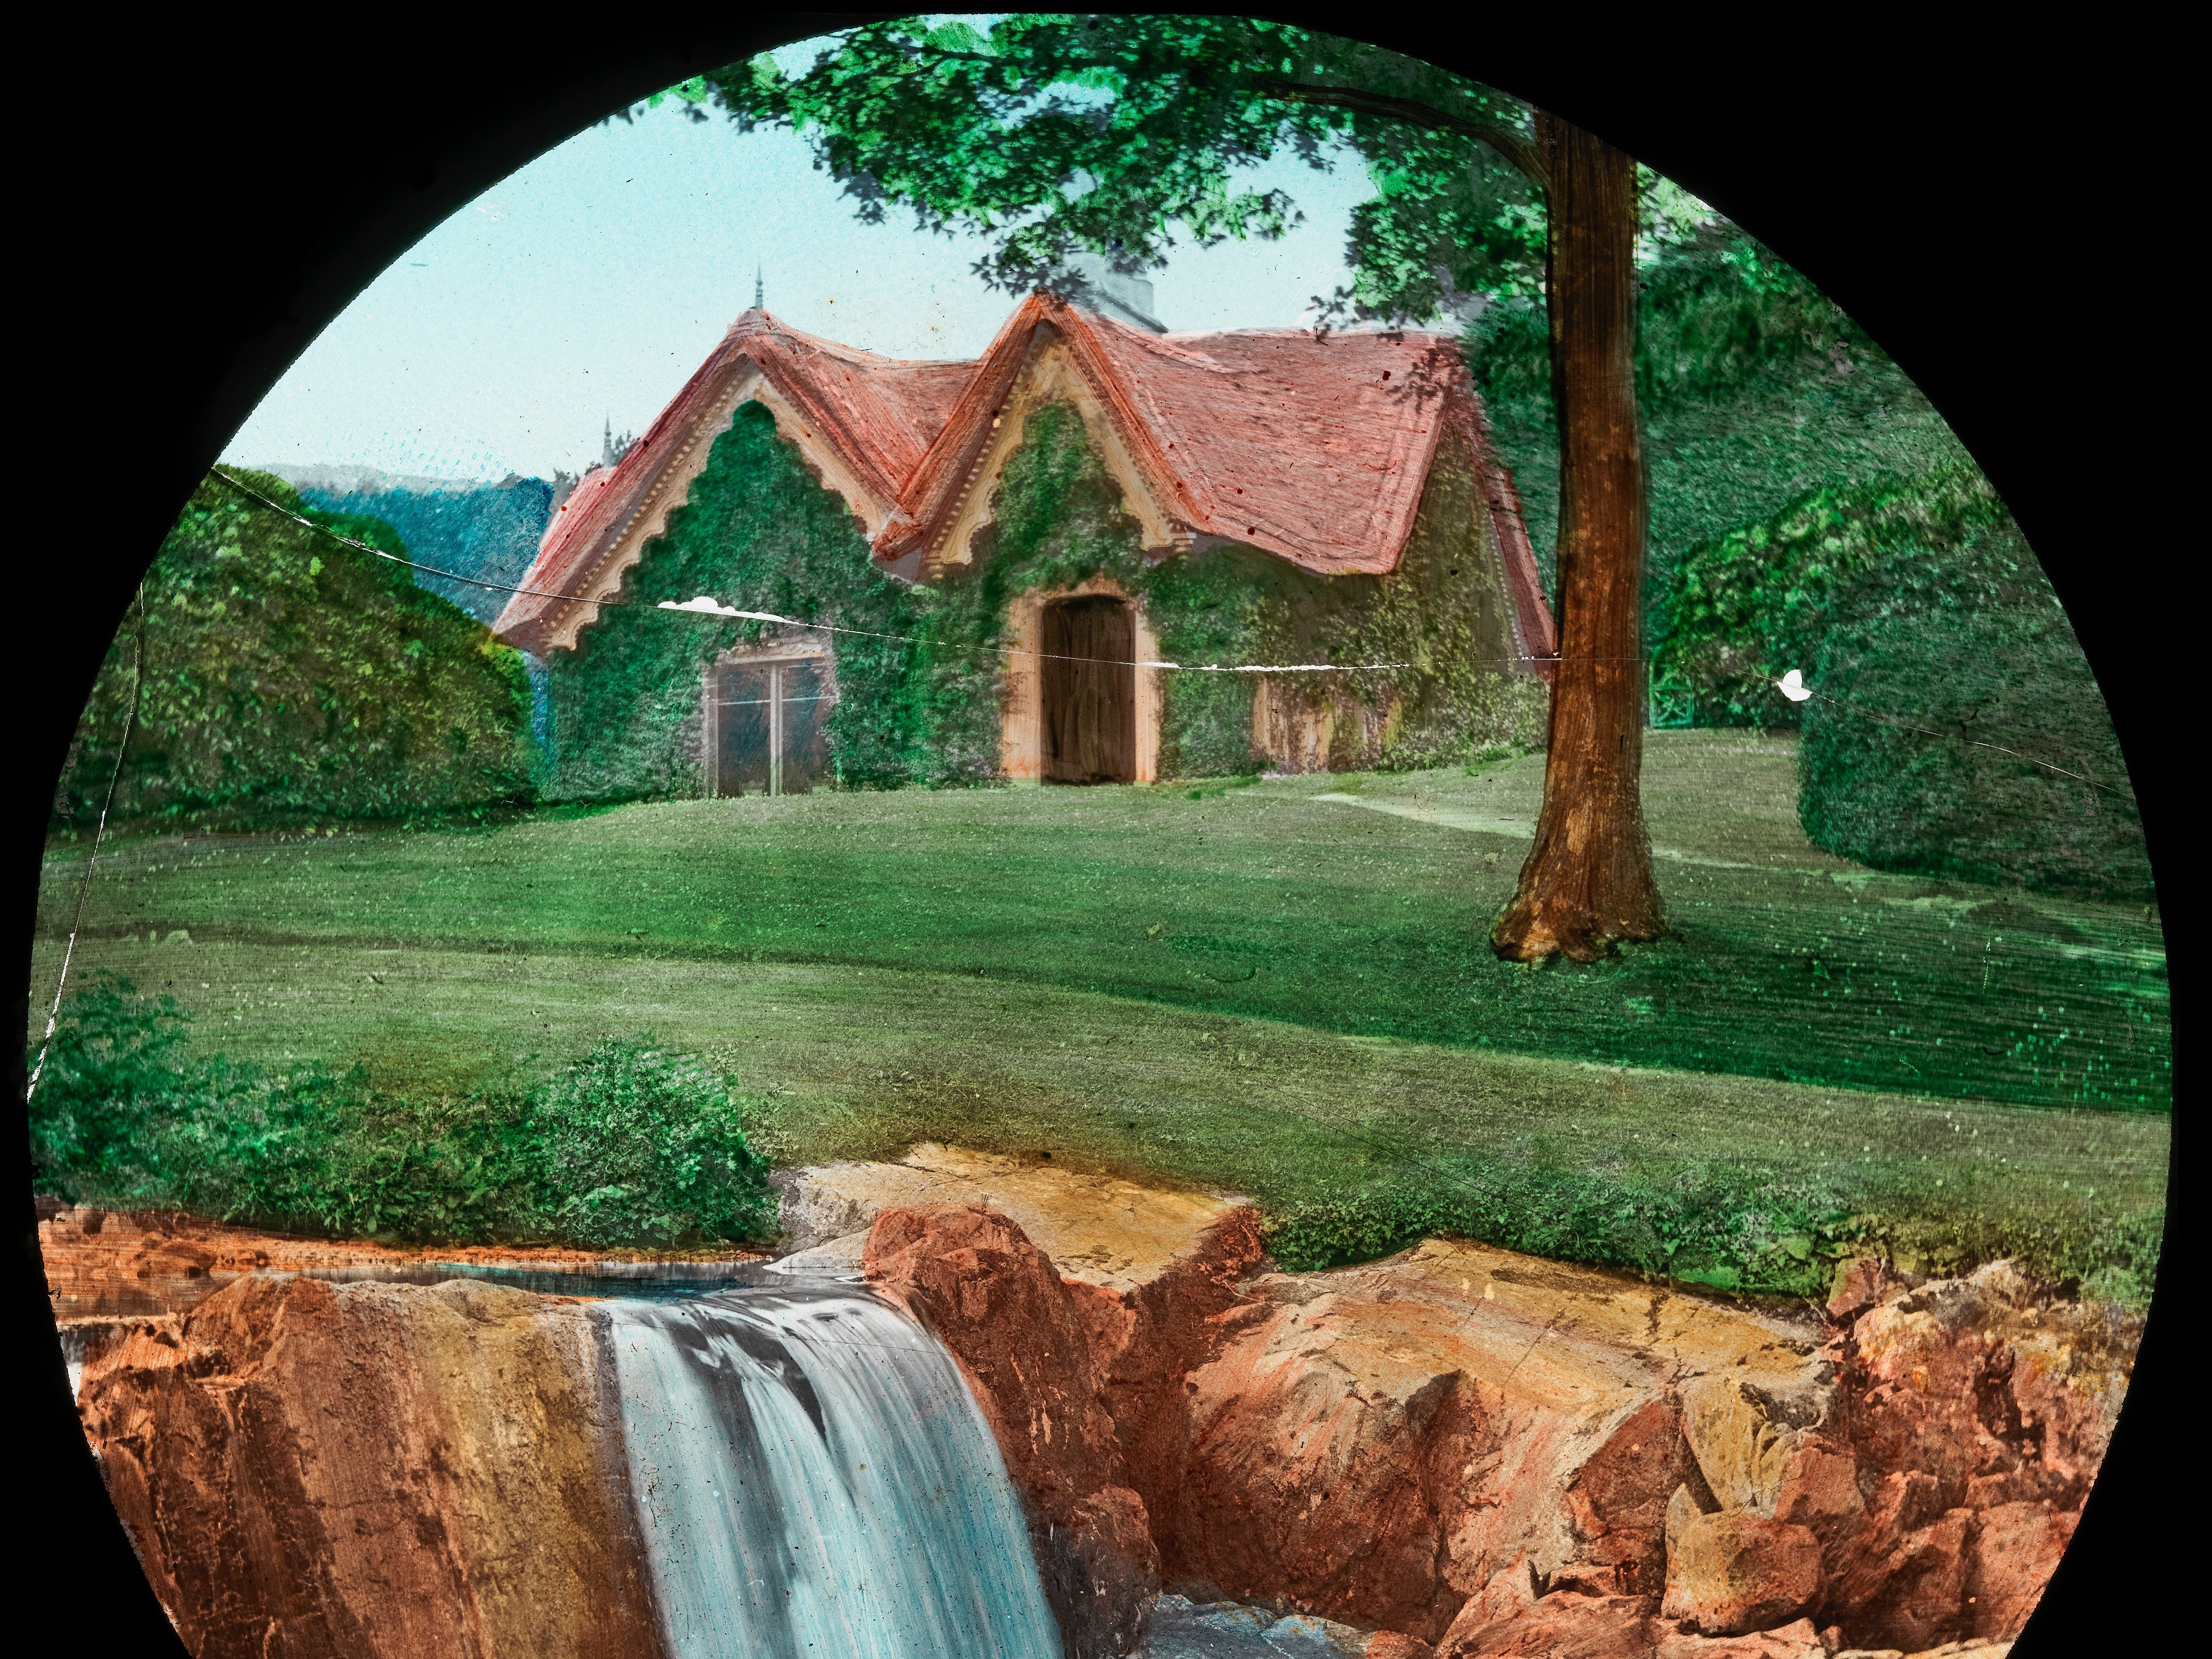 Photograph of cottage and waterfall